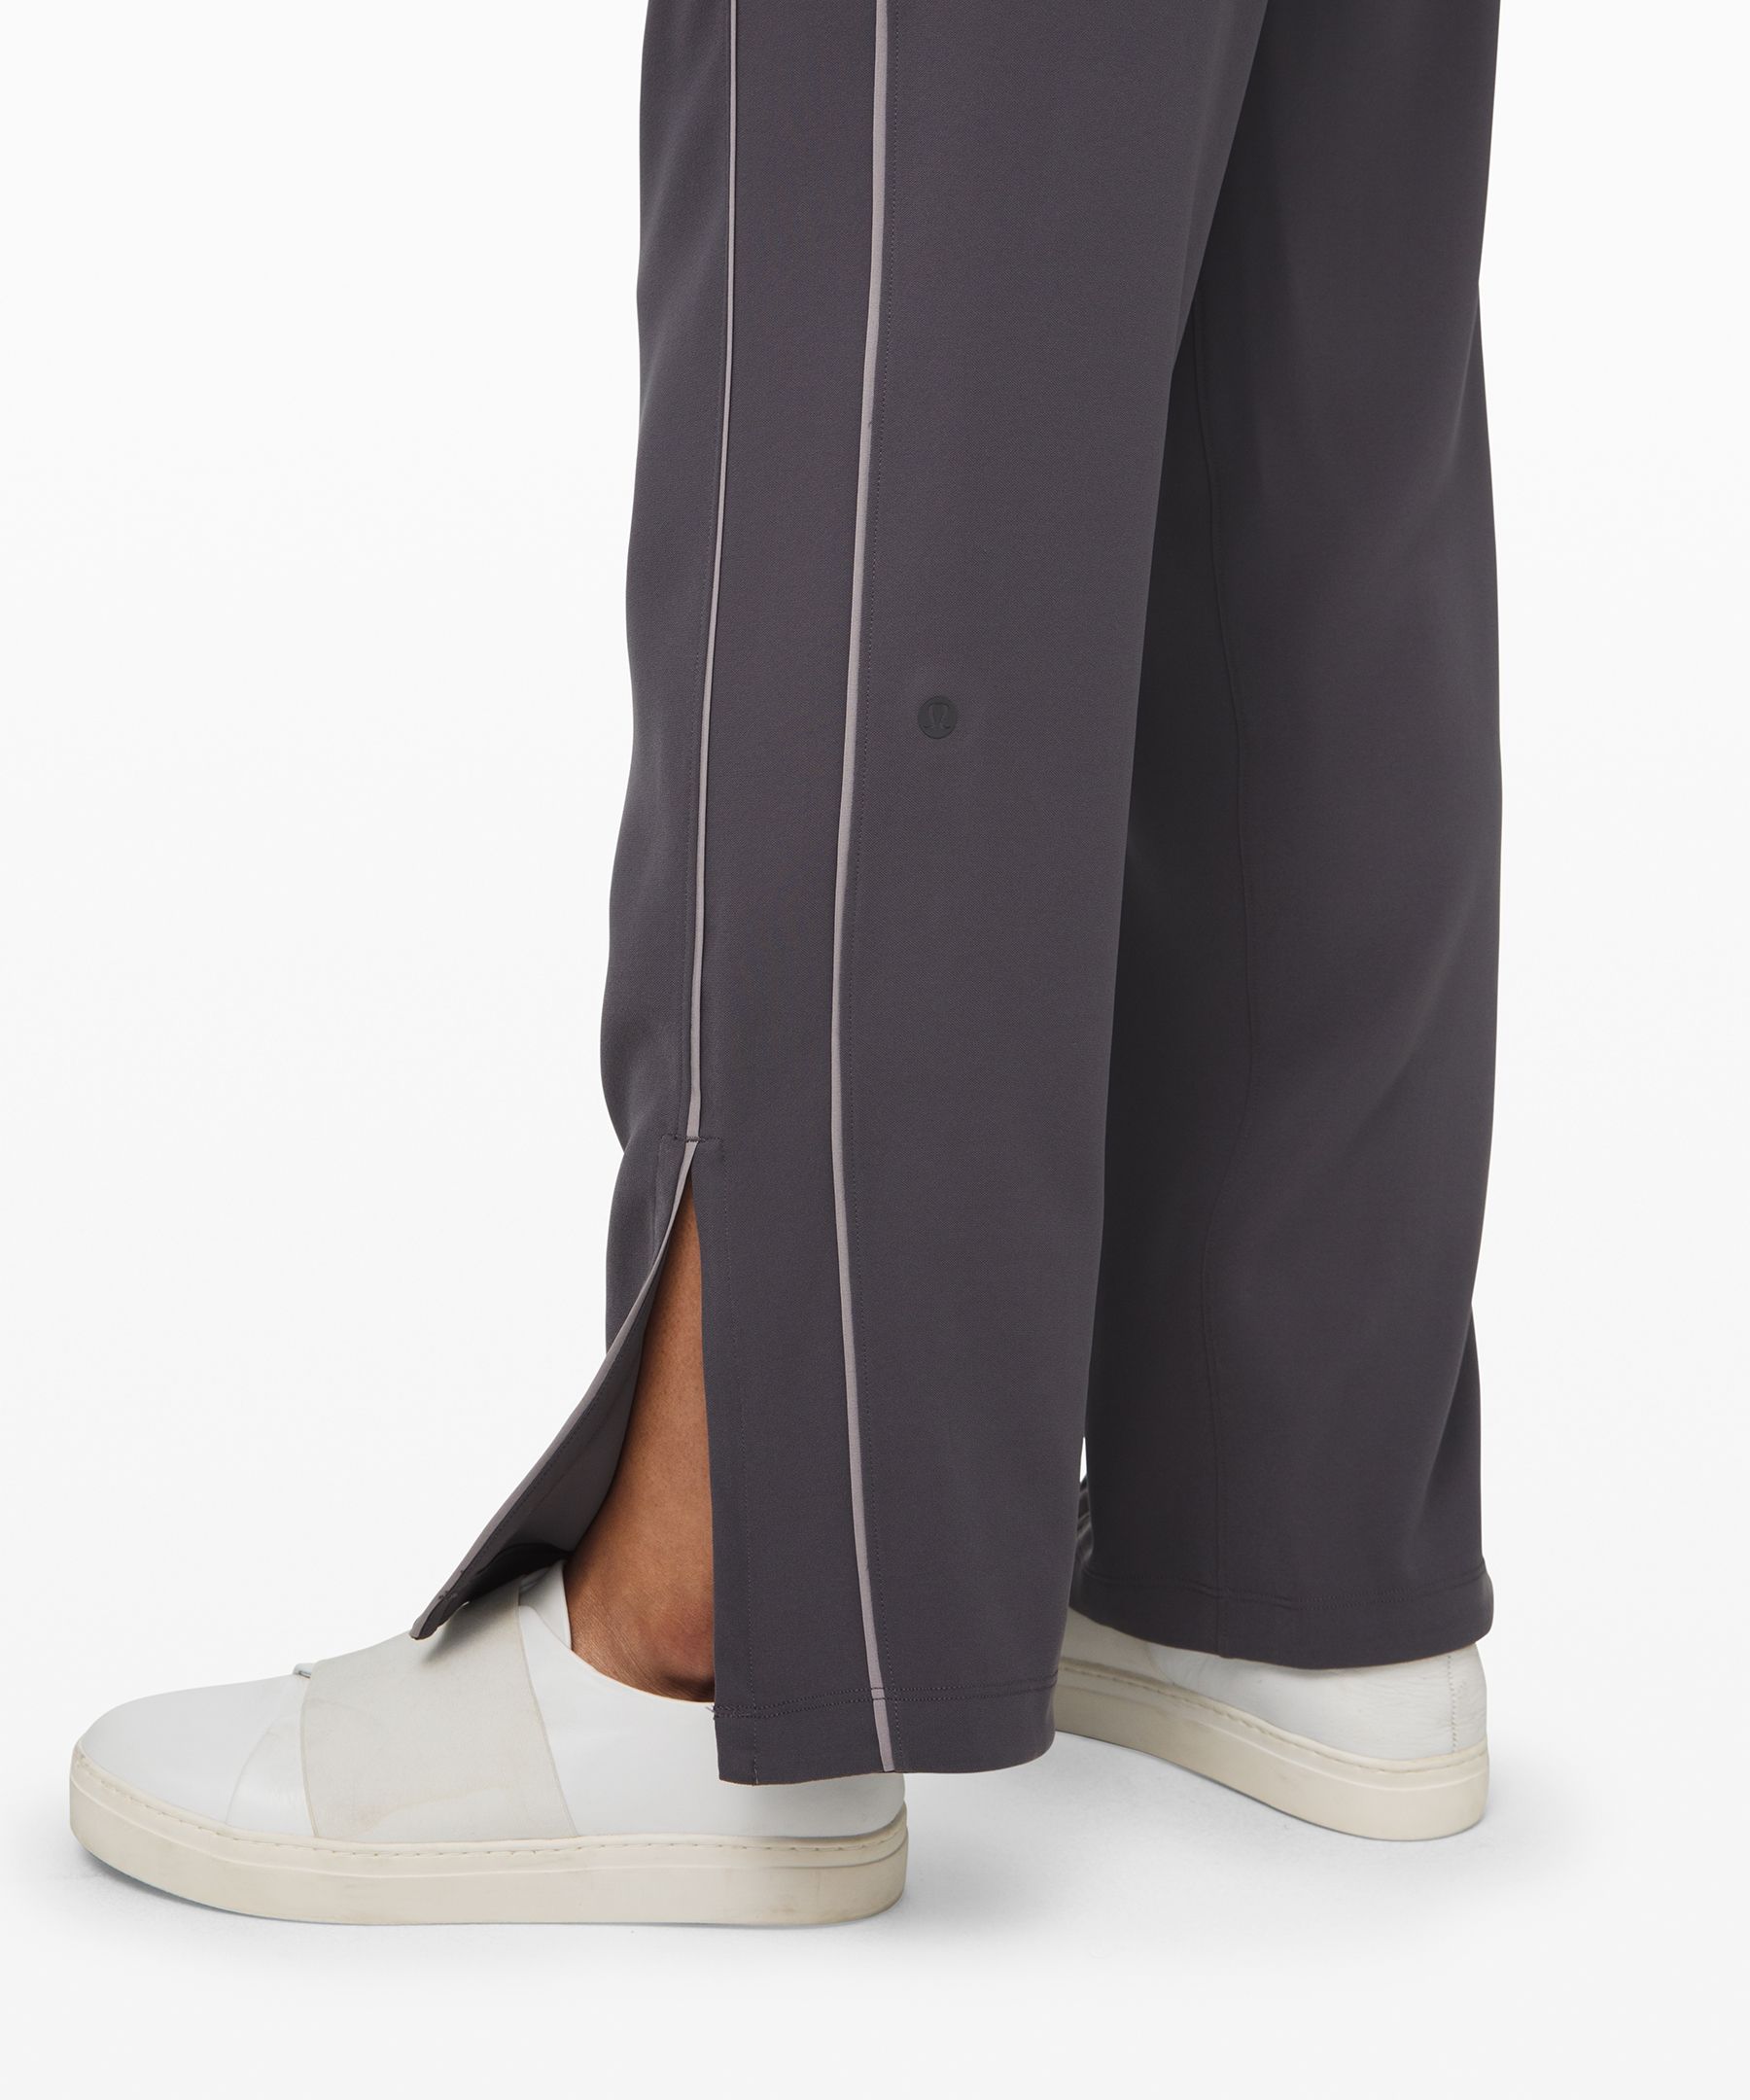 on the right track pant lululemon